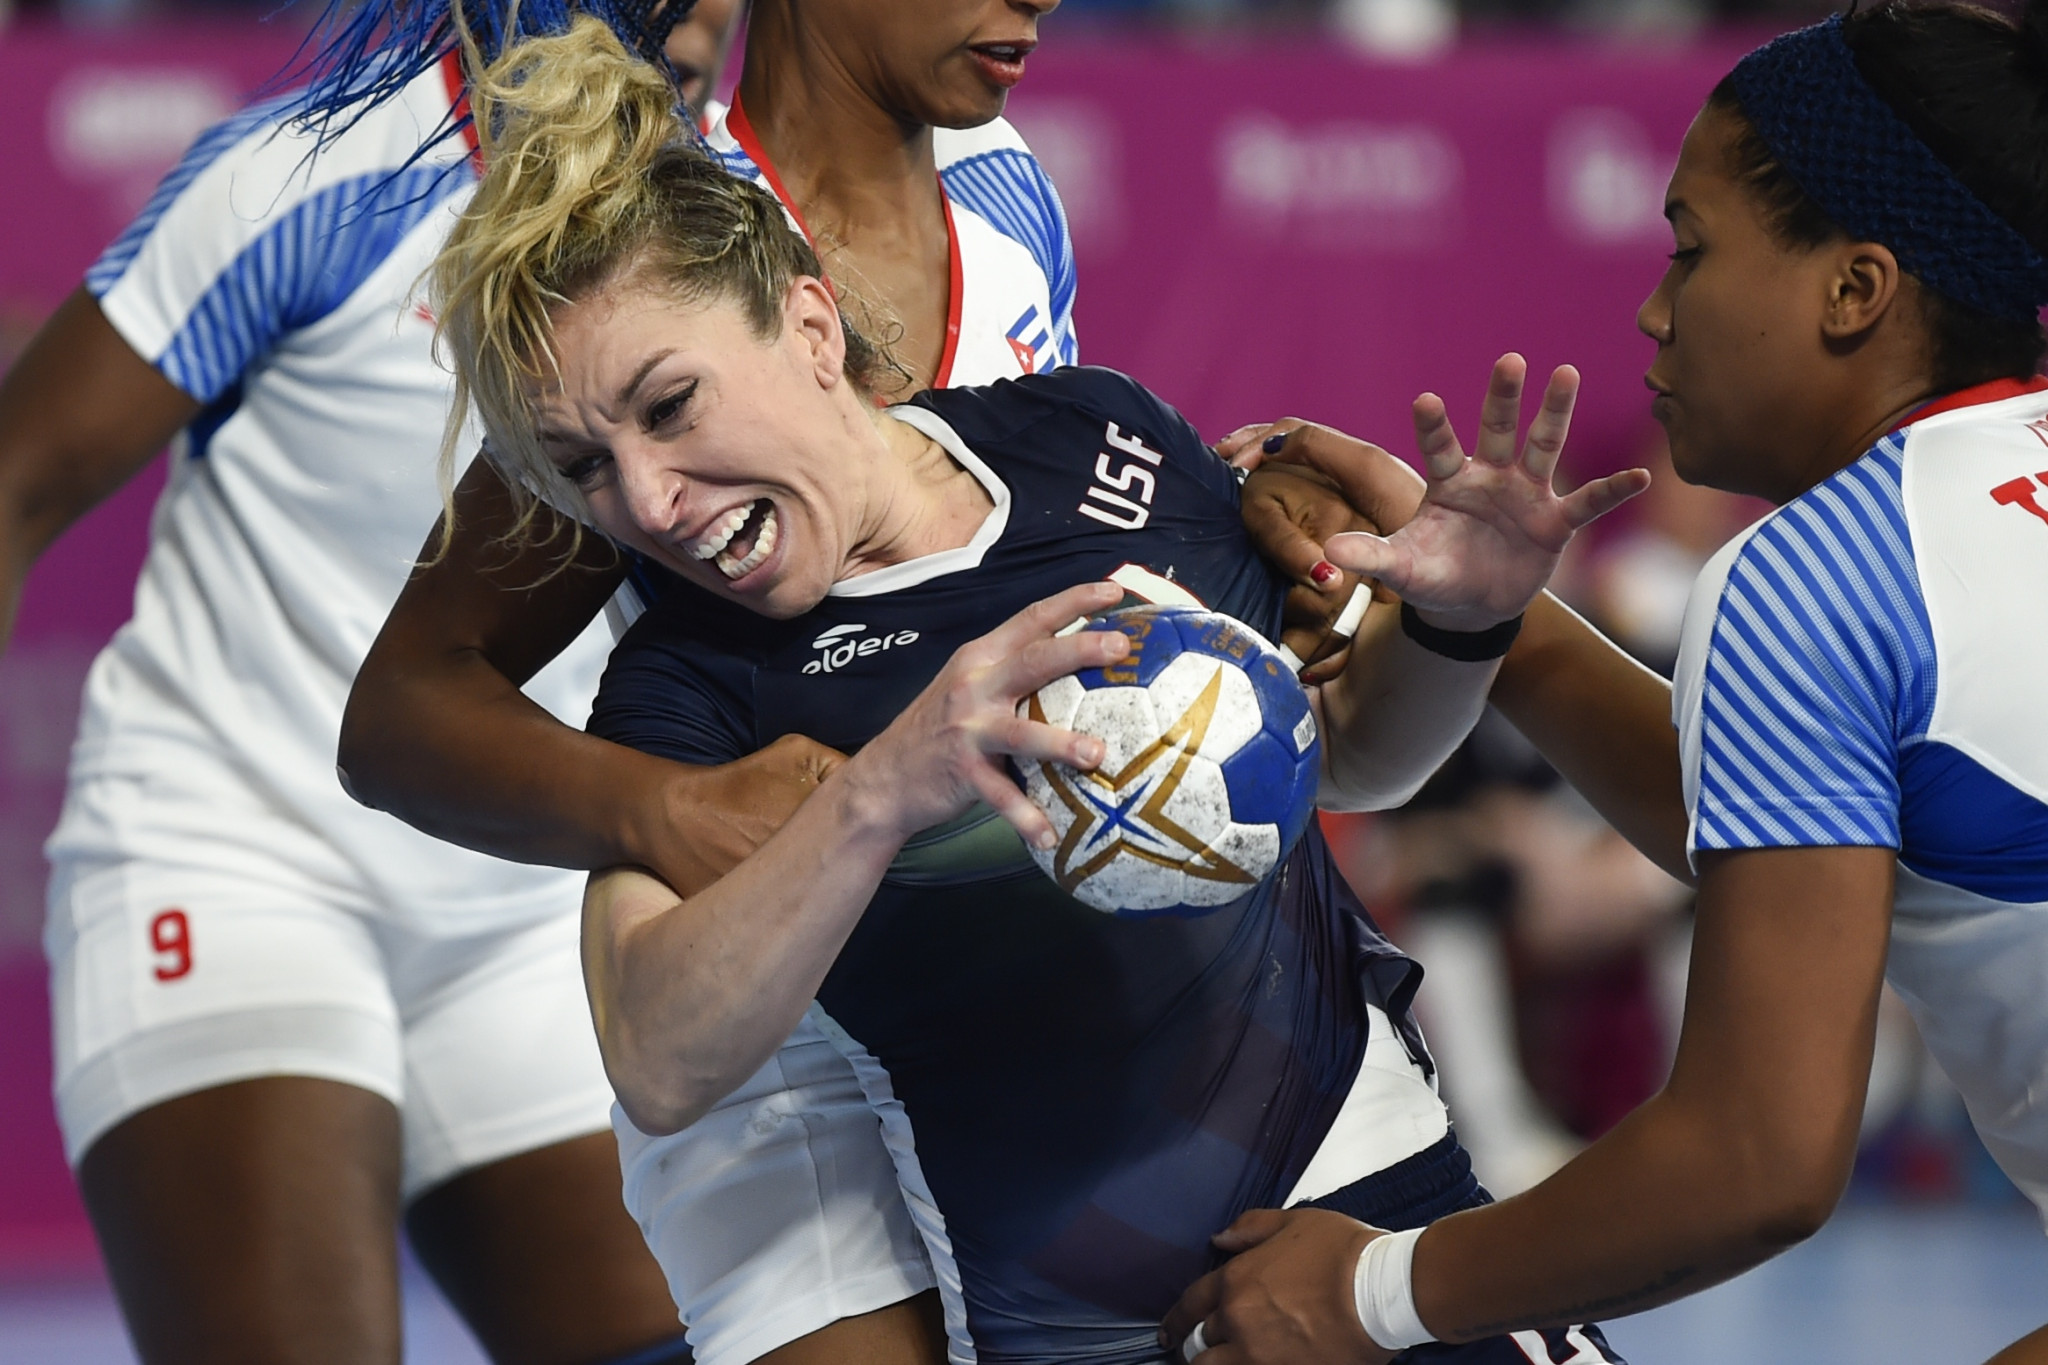 United States has been awarded the 2021 North American and Caribbean Women's Handball Championship ©Getty Images